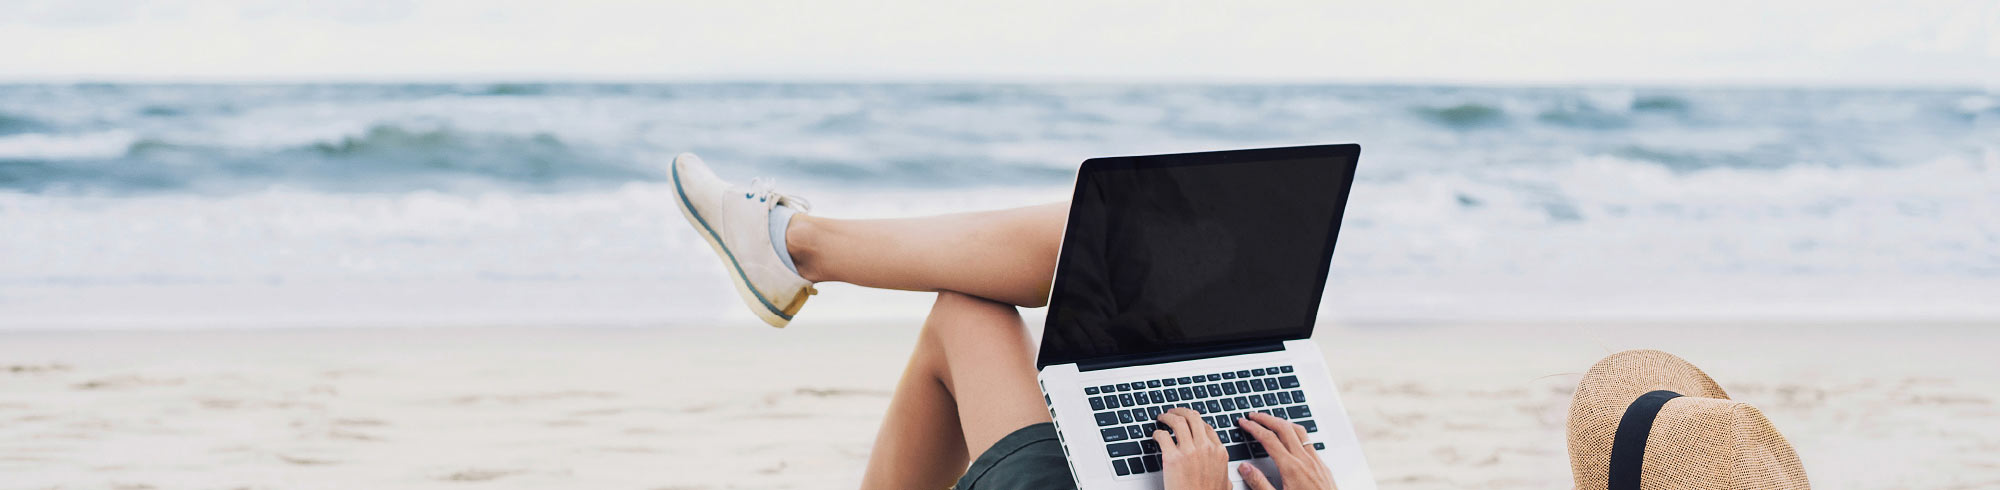 Person with laptop relaxing on a beach